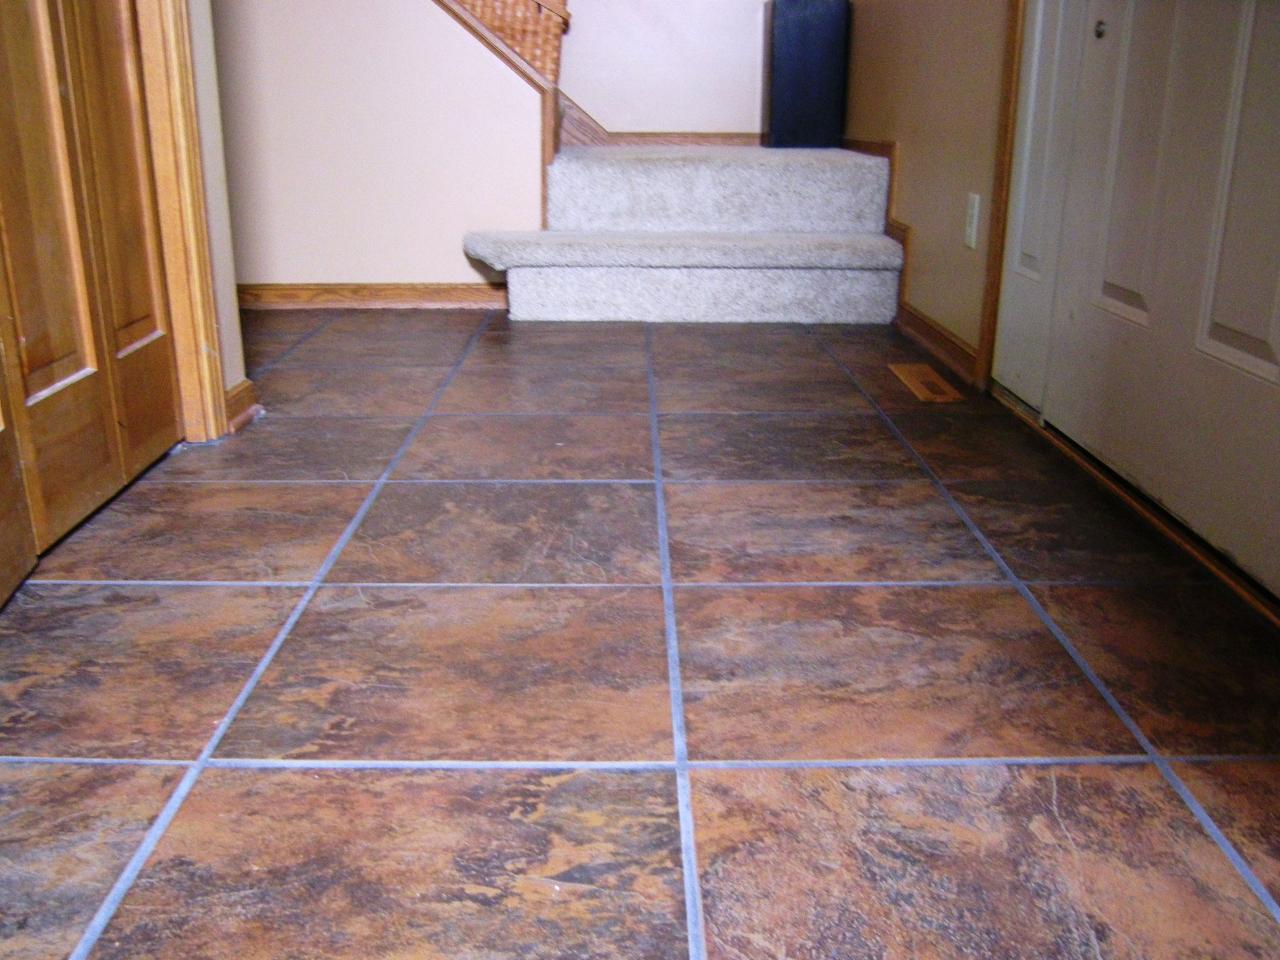 Laying A New Tile Floor How Tos Diy, What Not To Use On Ceramic Tile Floors